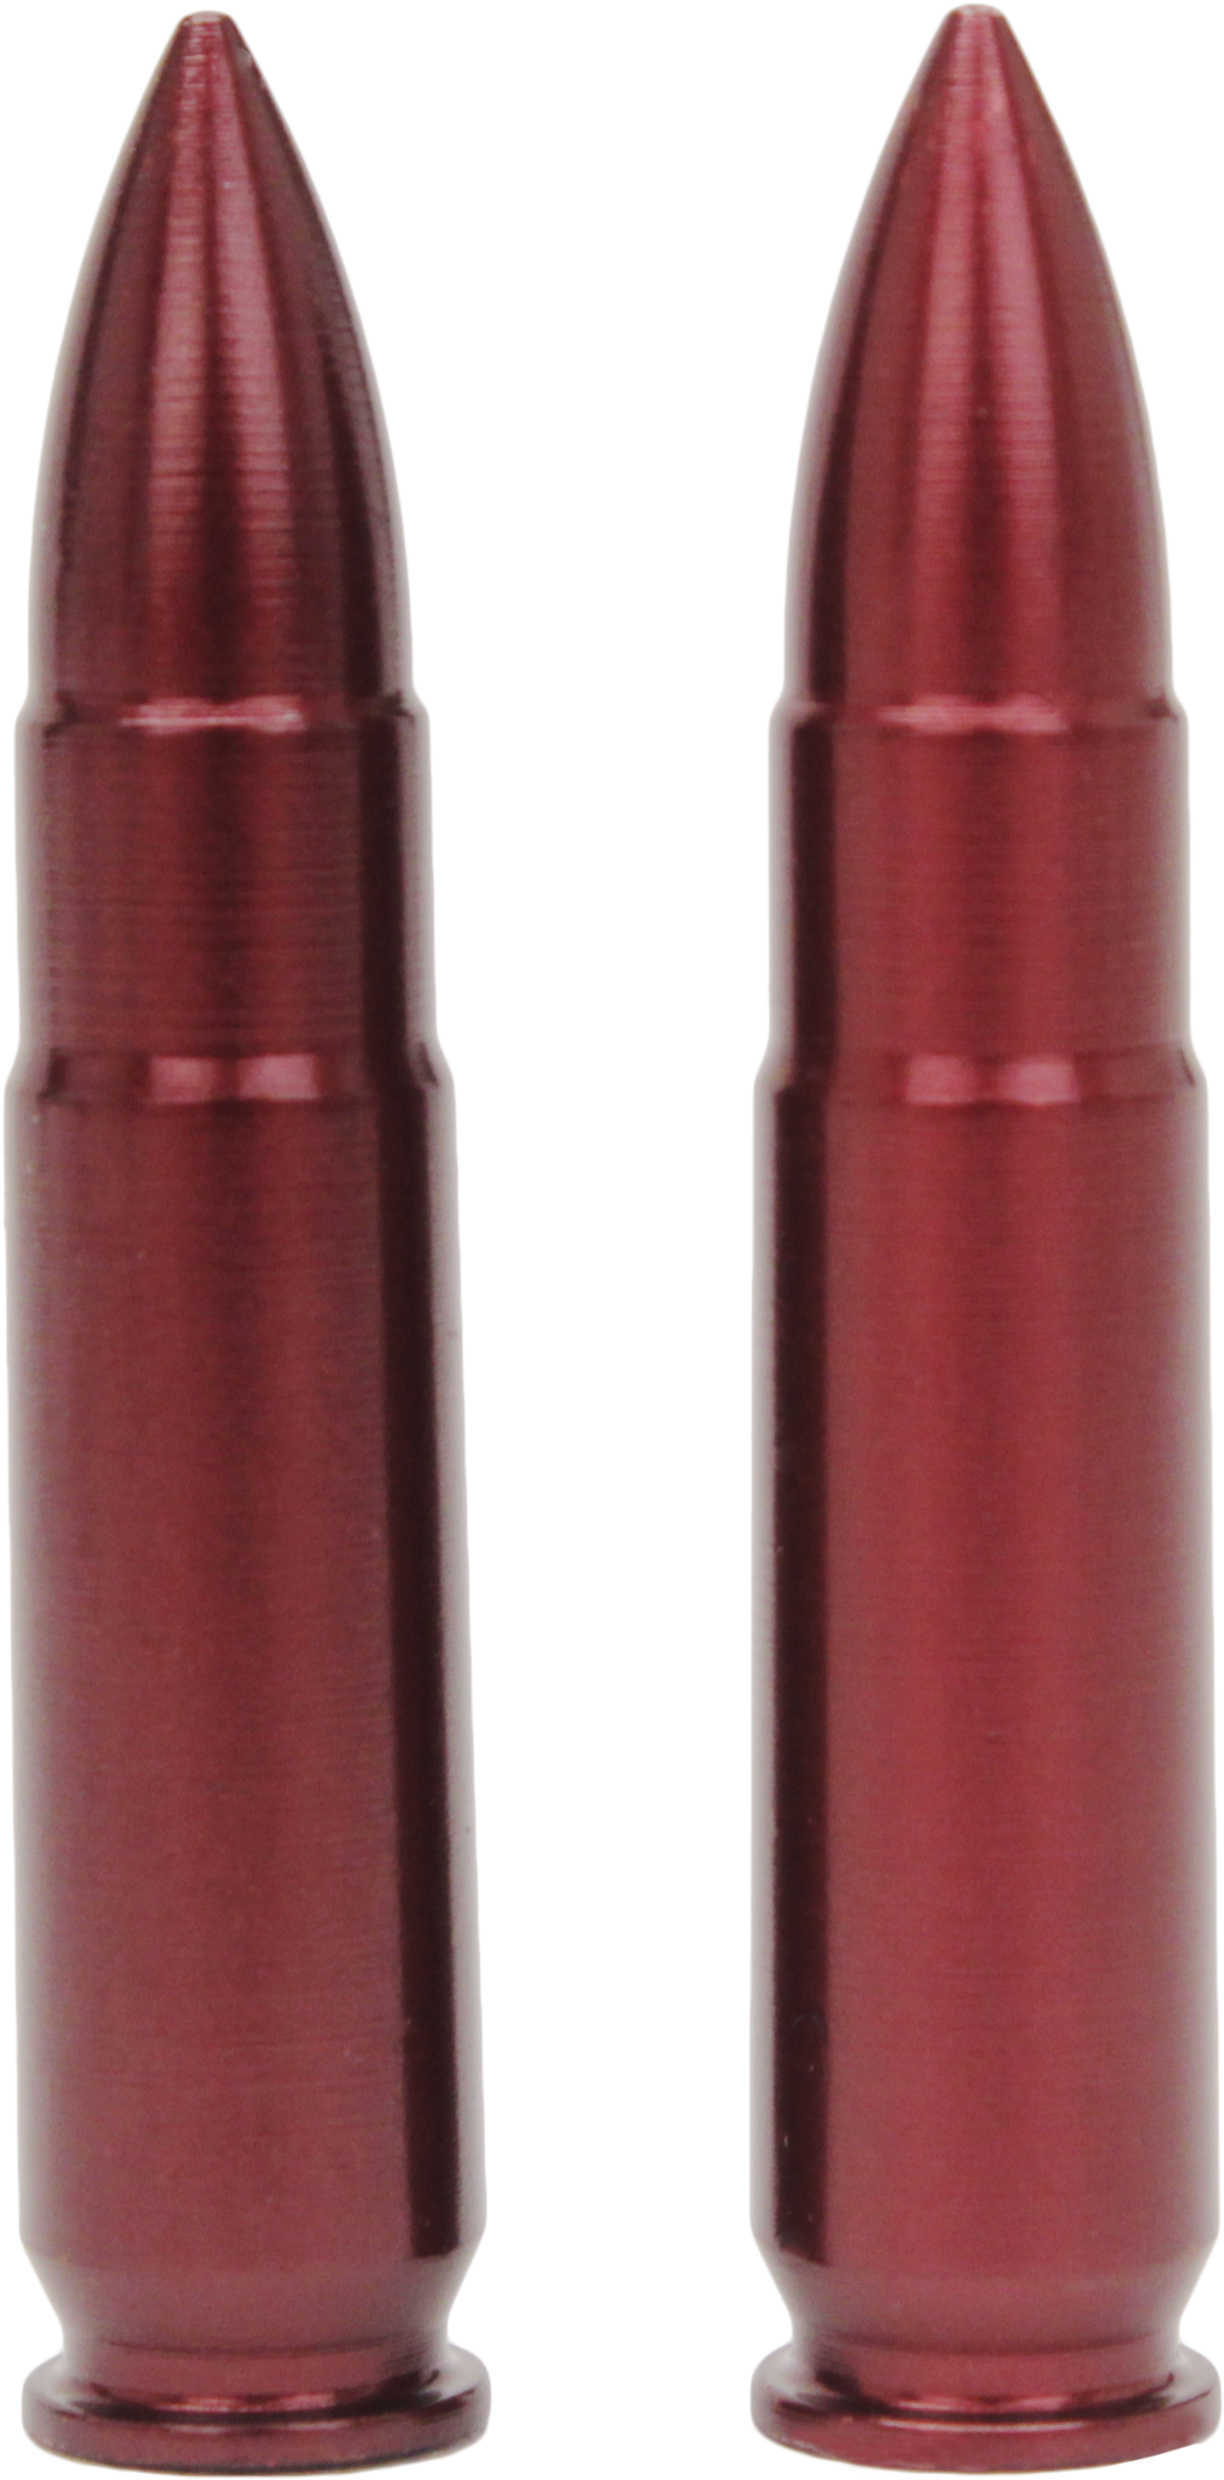 A-Zoom Rifle Metal Snap Caps 300 AAC Blackout (Per 2) Md: 12271